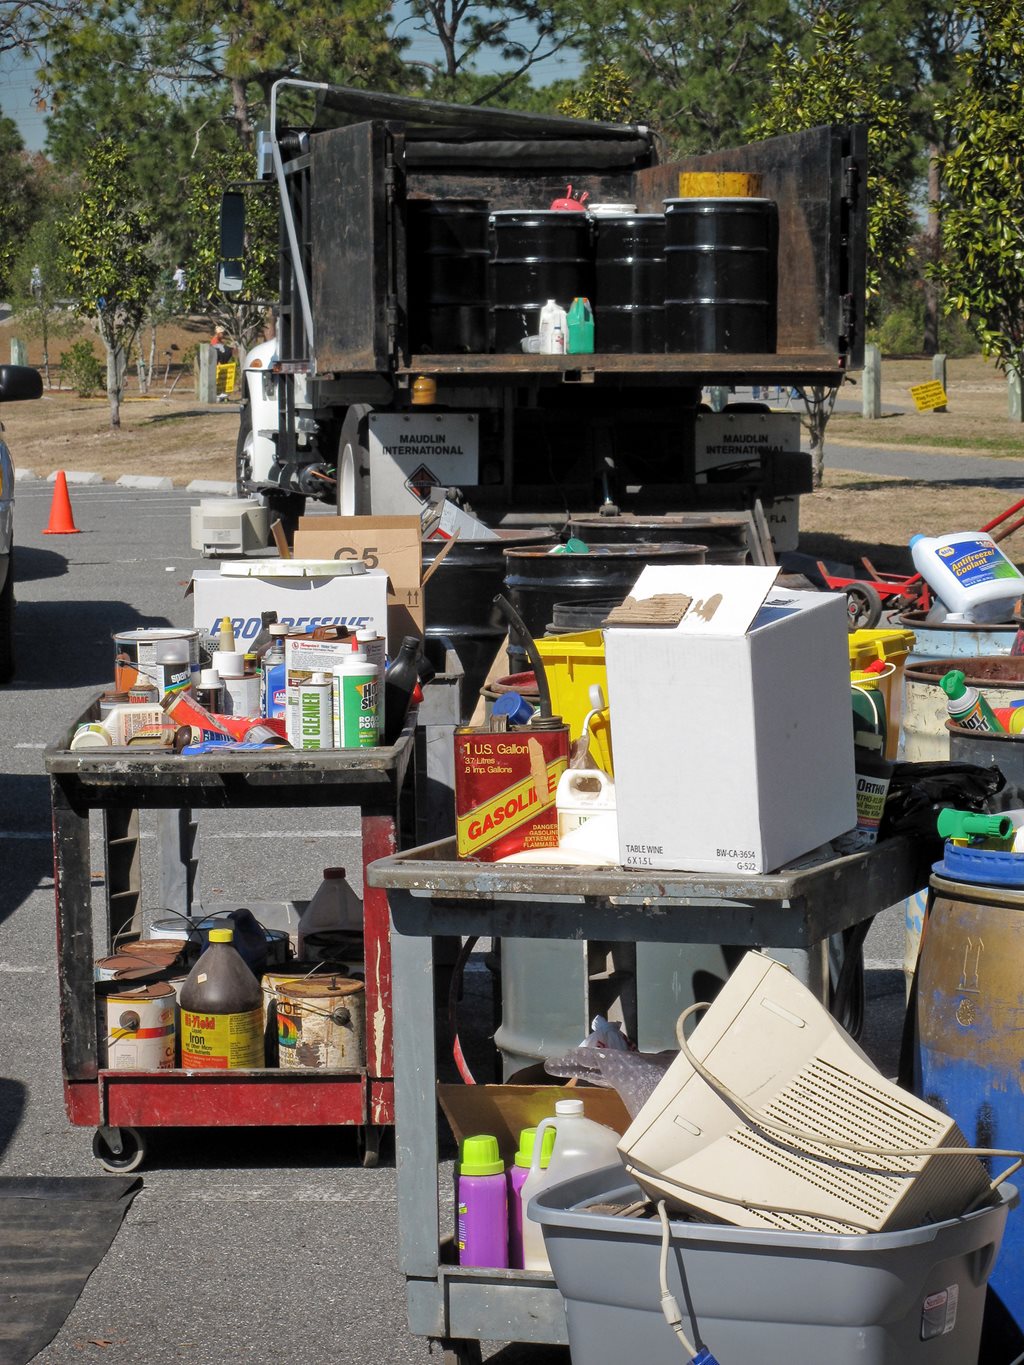 Paint cans and e-waste at a household waste collection event